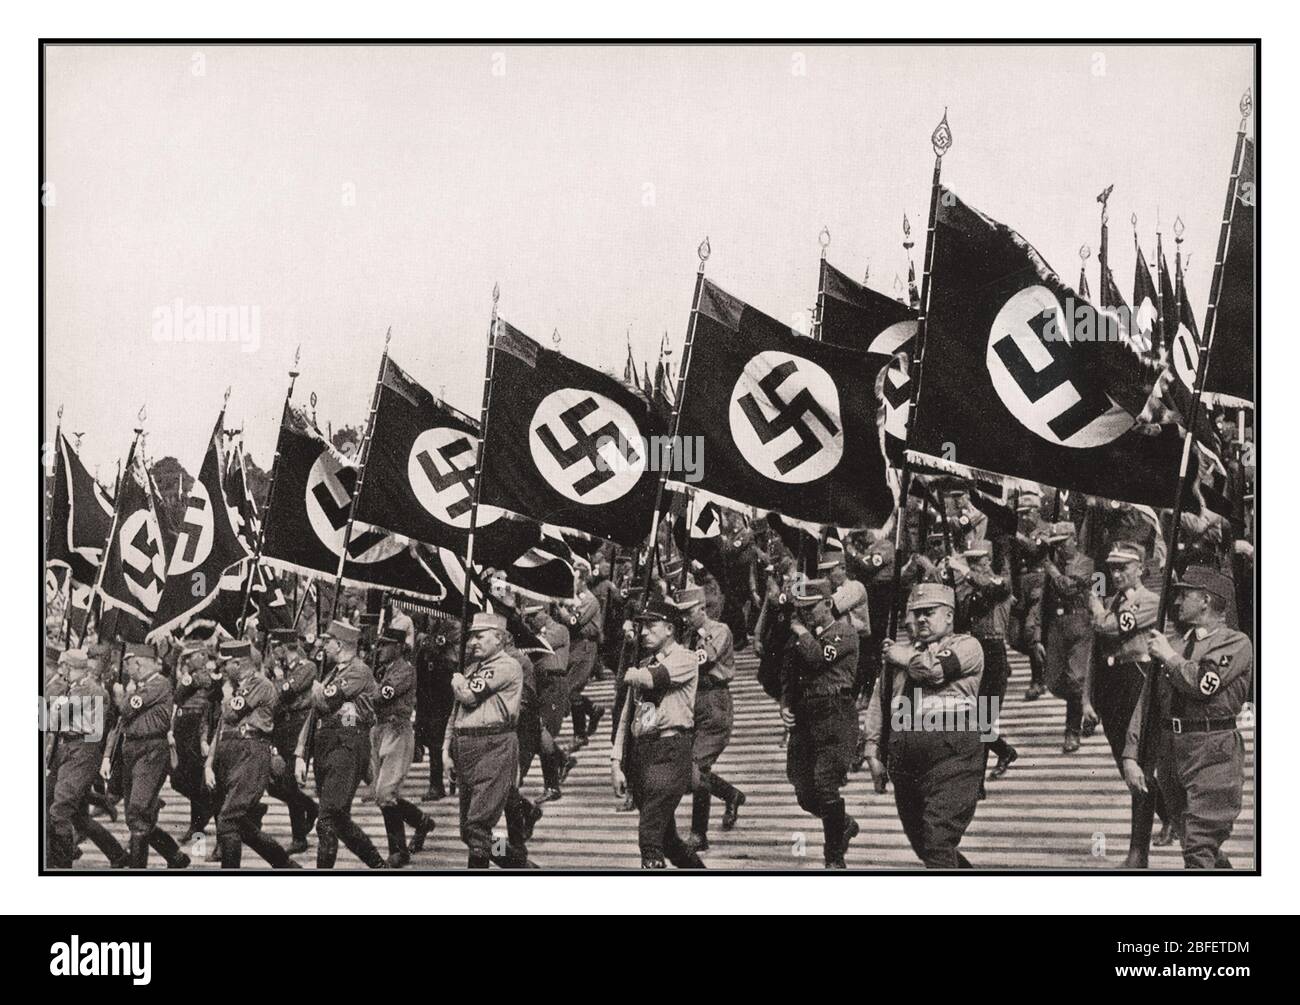 Sturmabteilung SA Troops Vintage Nazi German Sturmabteilung SA Troops marching with Nazi Swastika Flags at Nazi Rally Nuremberg Germany 1933. Used as main cover image for propaganda film 'Triumph of the Will by Leni Riefenstahl Stock Photo